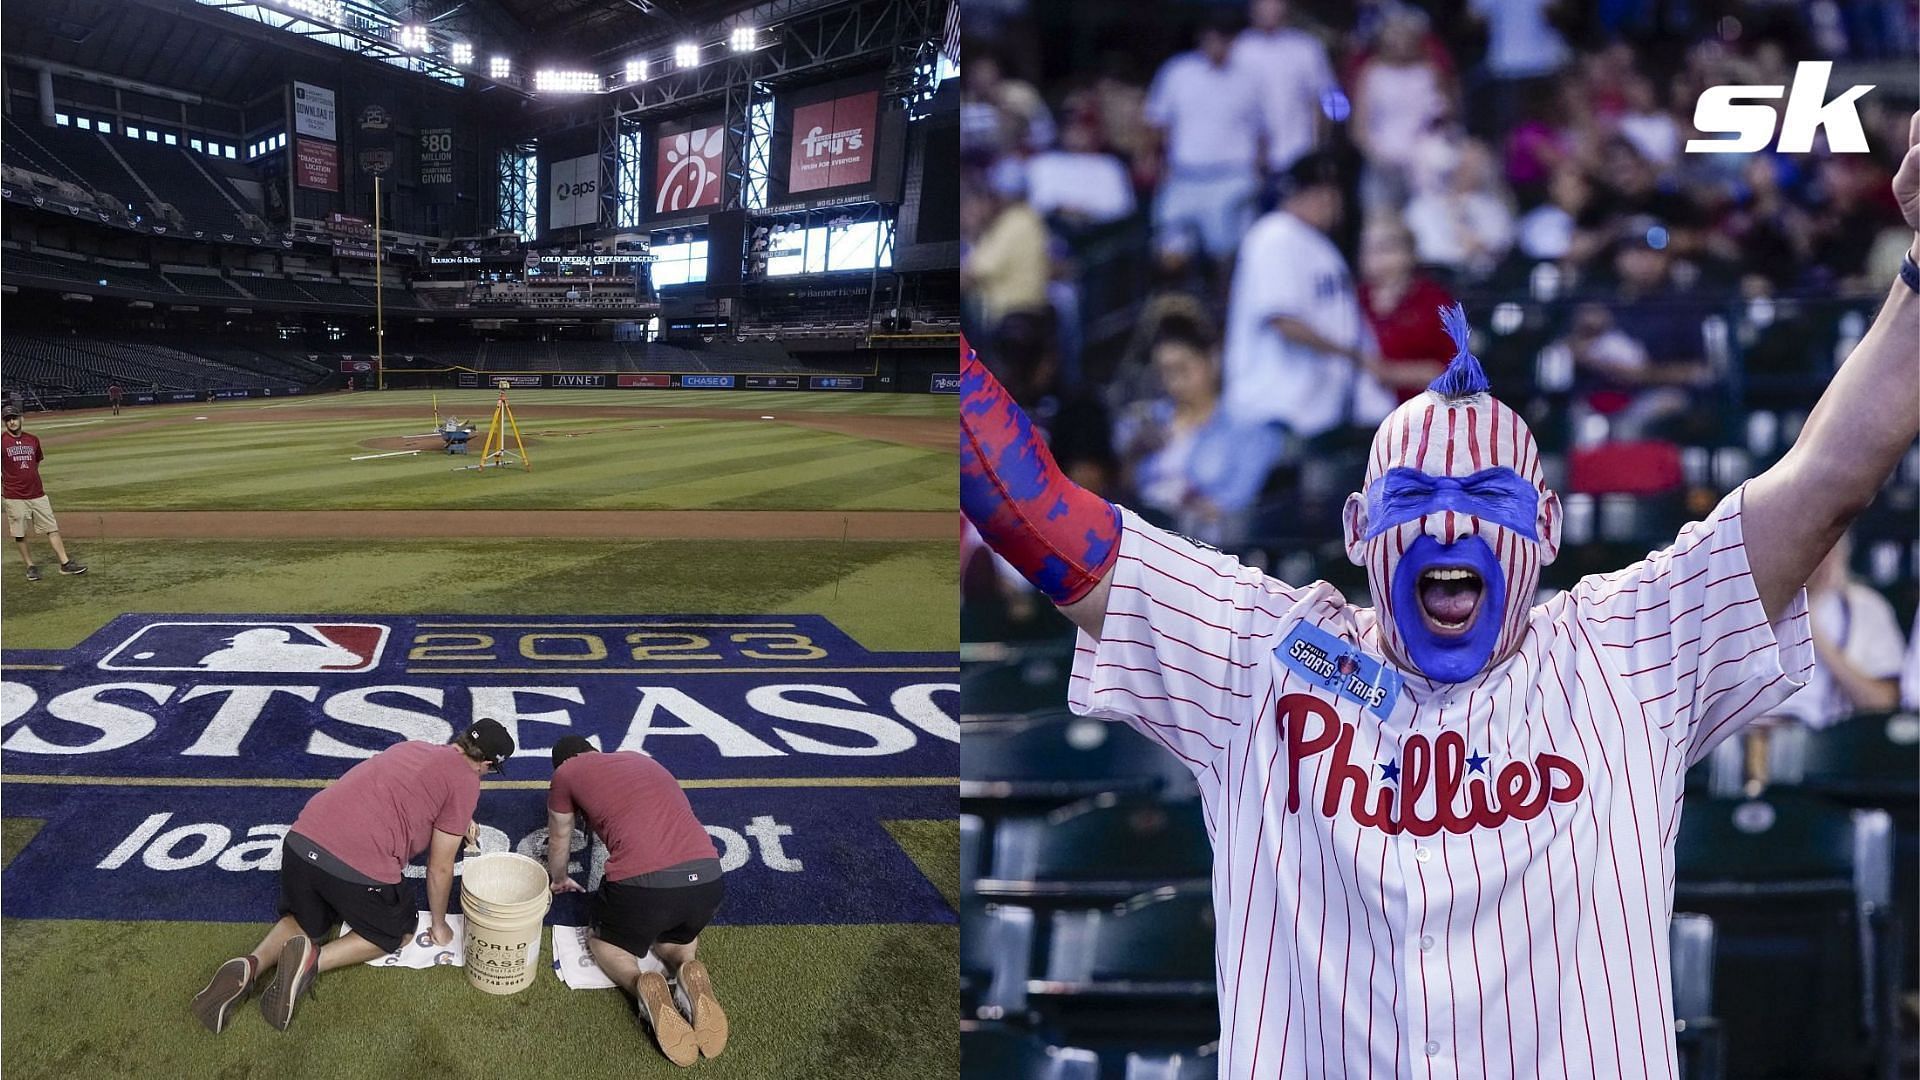 Philadelphia Phillies fans have reportedly bought out tickets to Game 3 of NLCS to keep D-Backs fans out